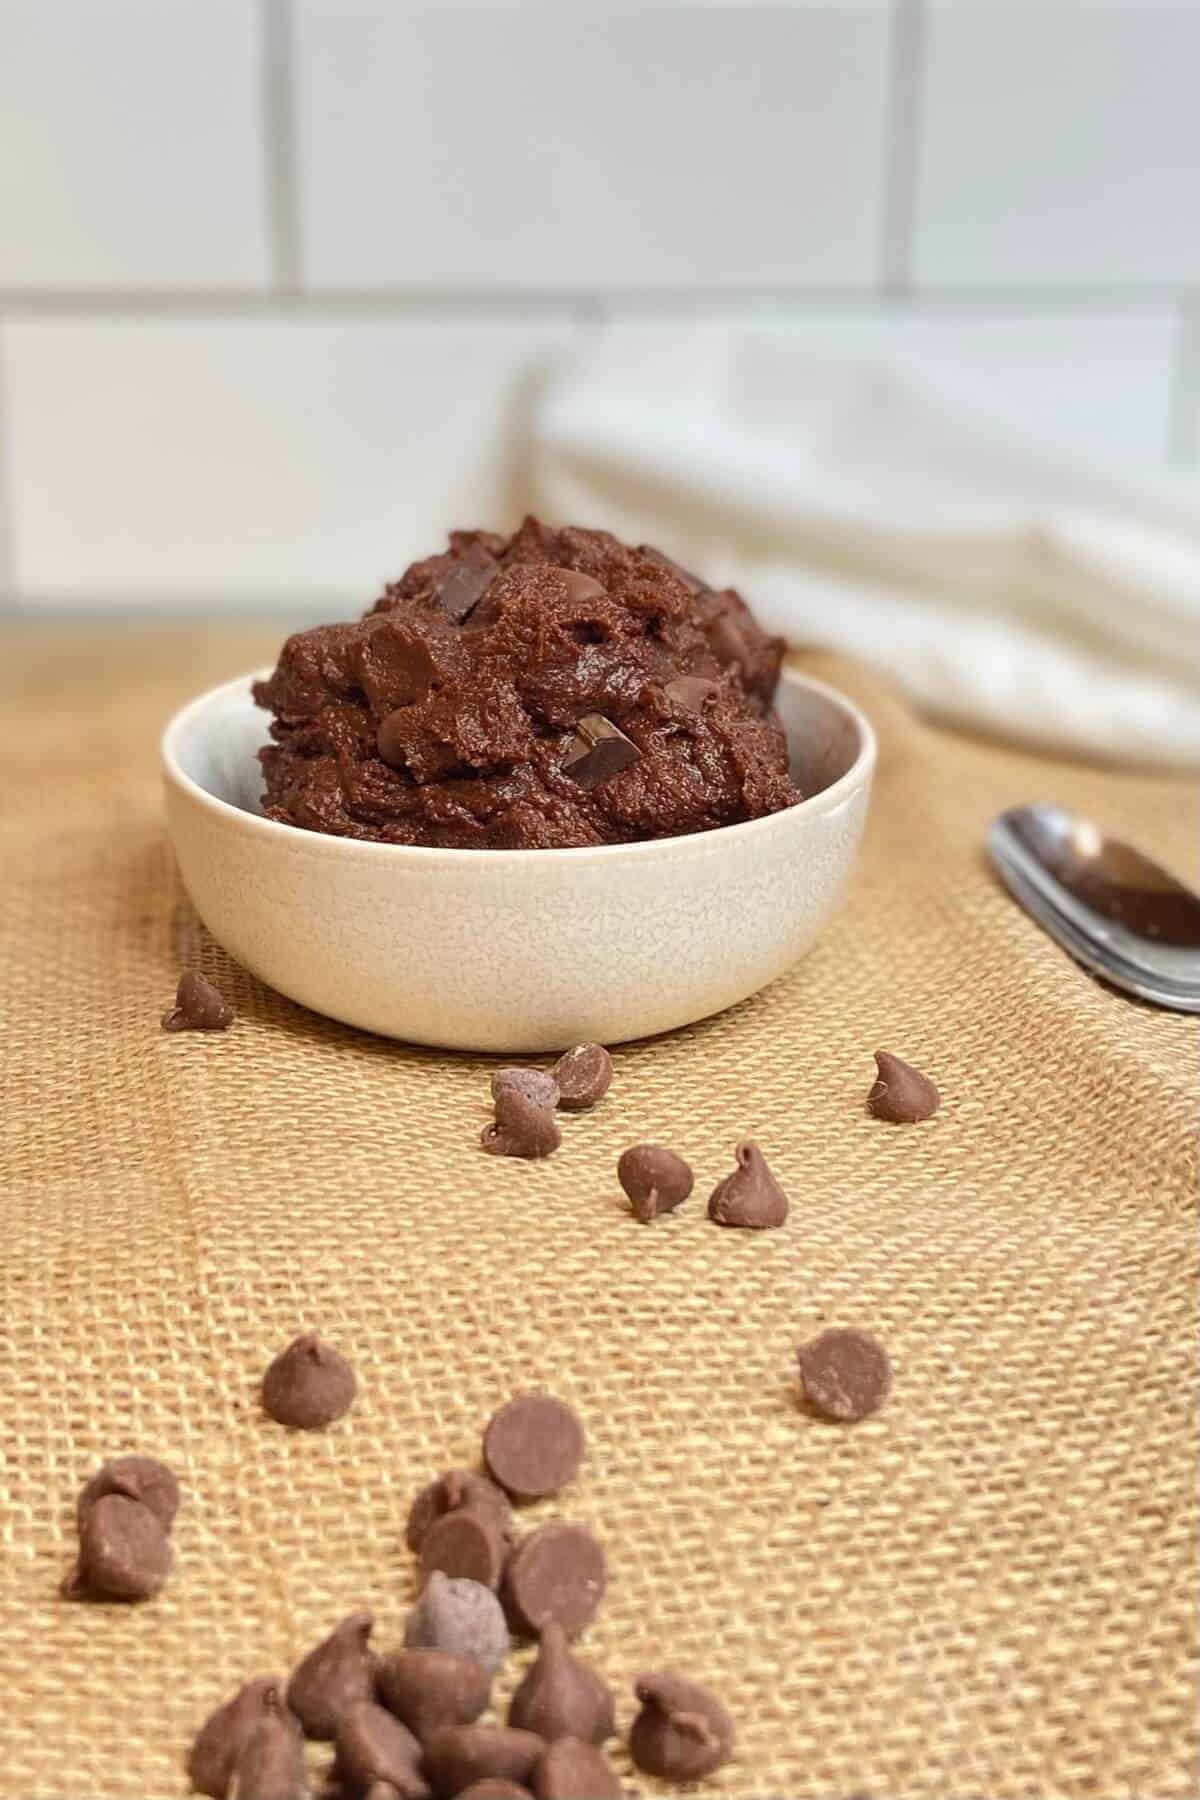 Served in a small bowl, with chocolate chips sprinkled on the table.